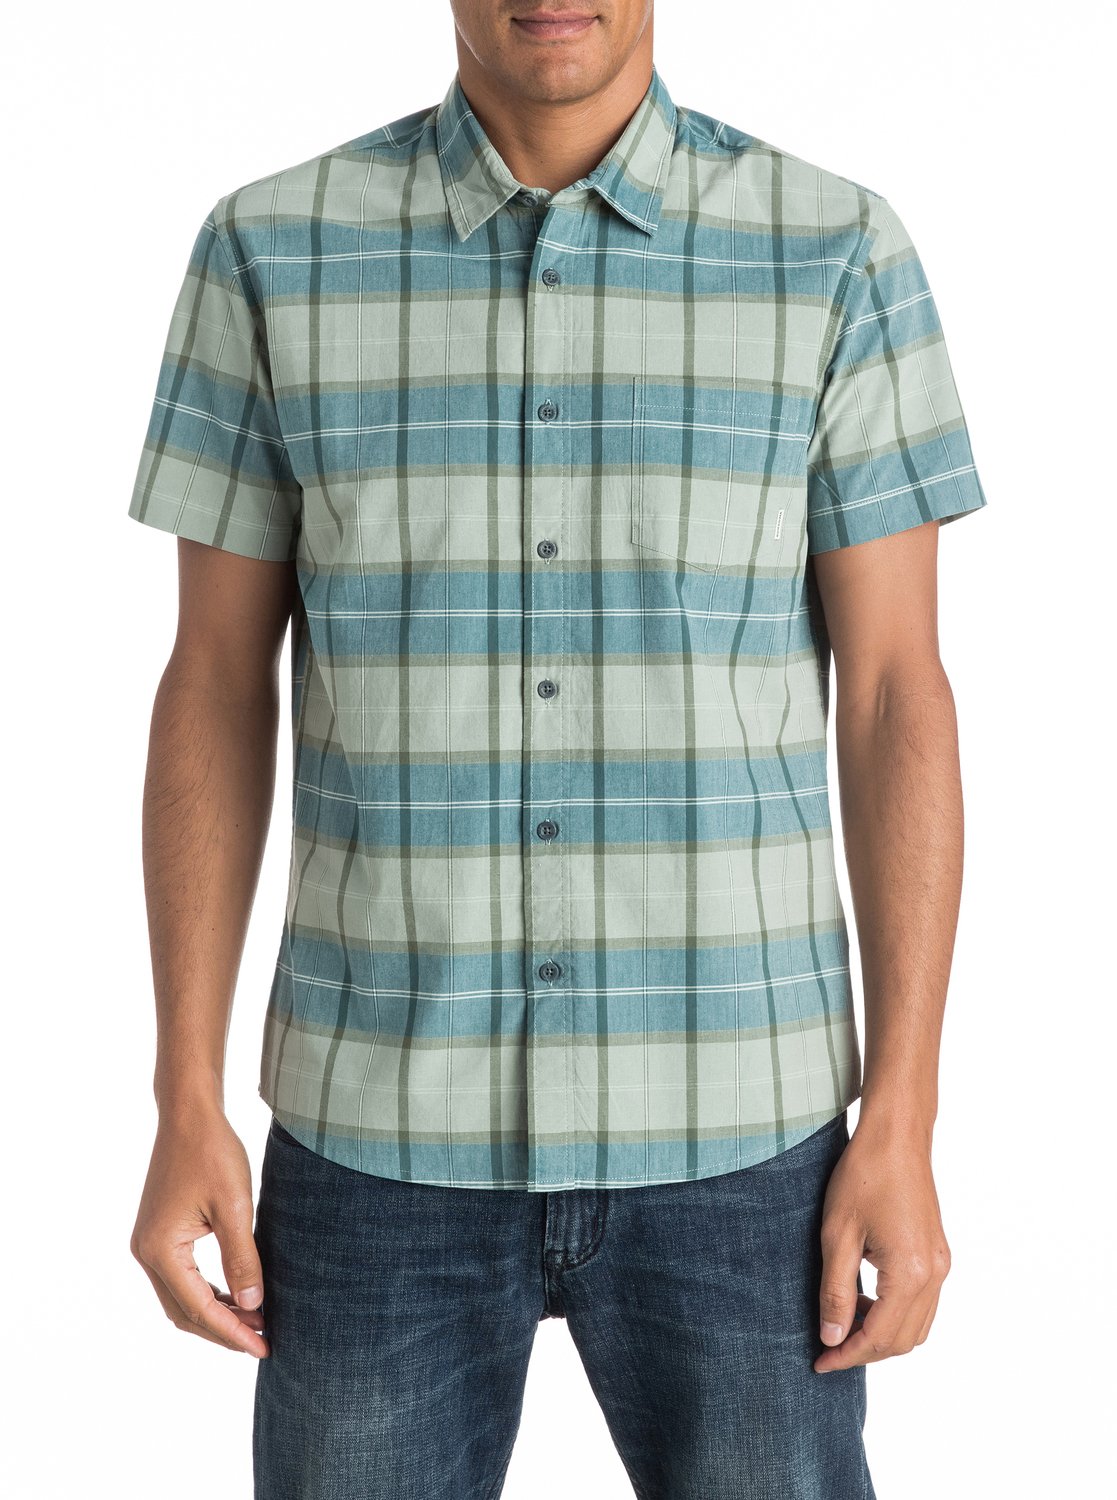 Quiksilver Mens Everyday Check Short Sleeve